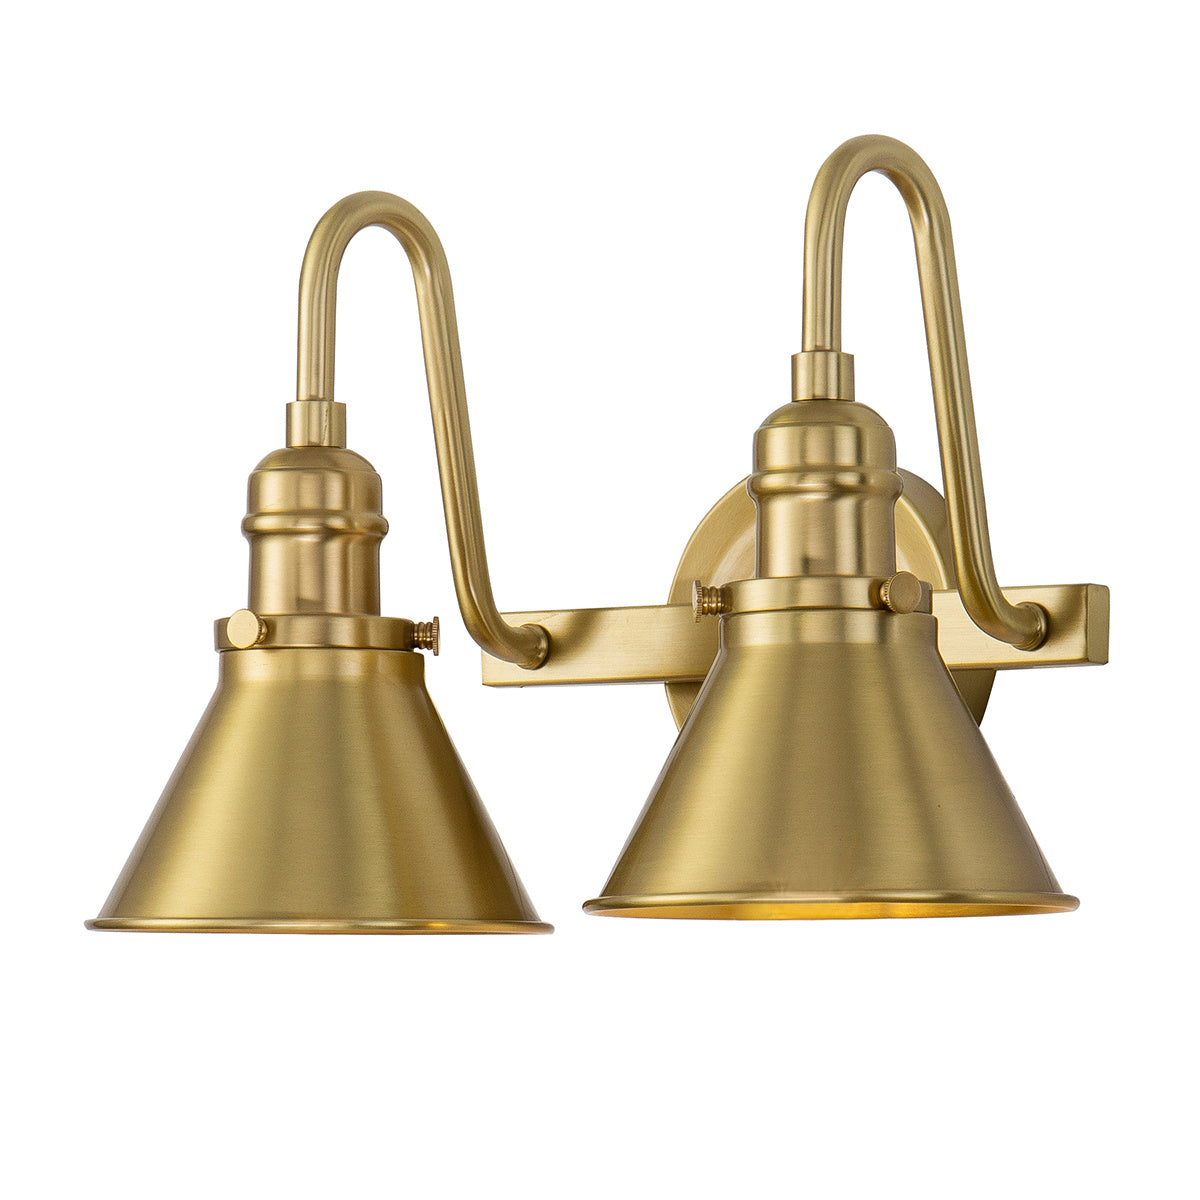 Lucas + McKearn Two Light Vanity from the Provence collection in Aged Brass finish